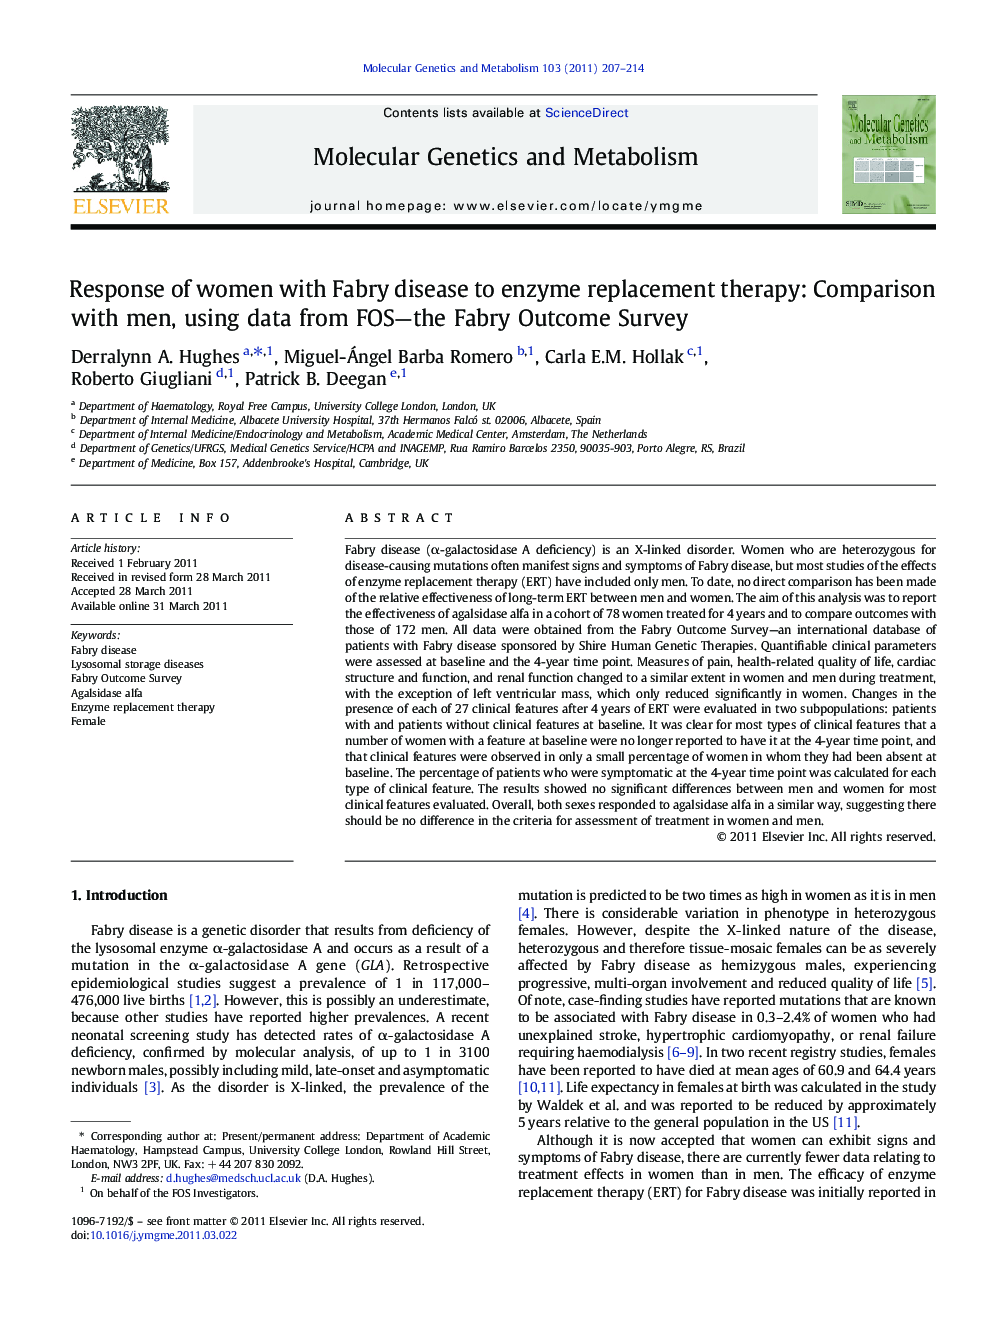 Response of women with Fabry disease to enzyme replacement therapy: Comparison with men, using data from FOS—the Fabry Outcome Survey